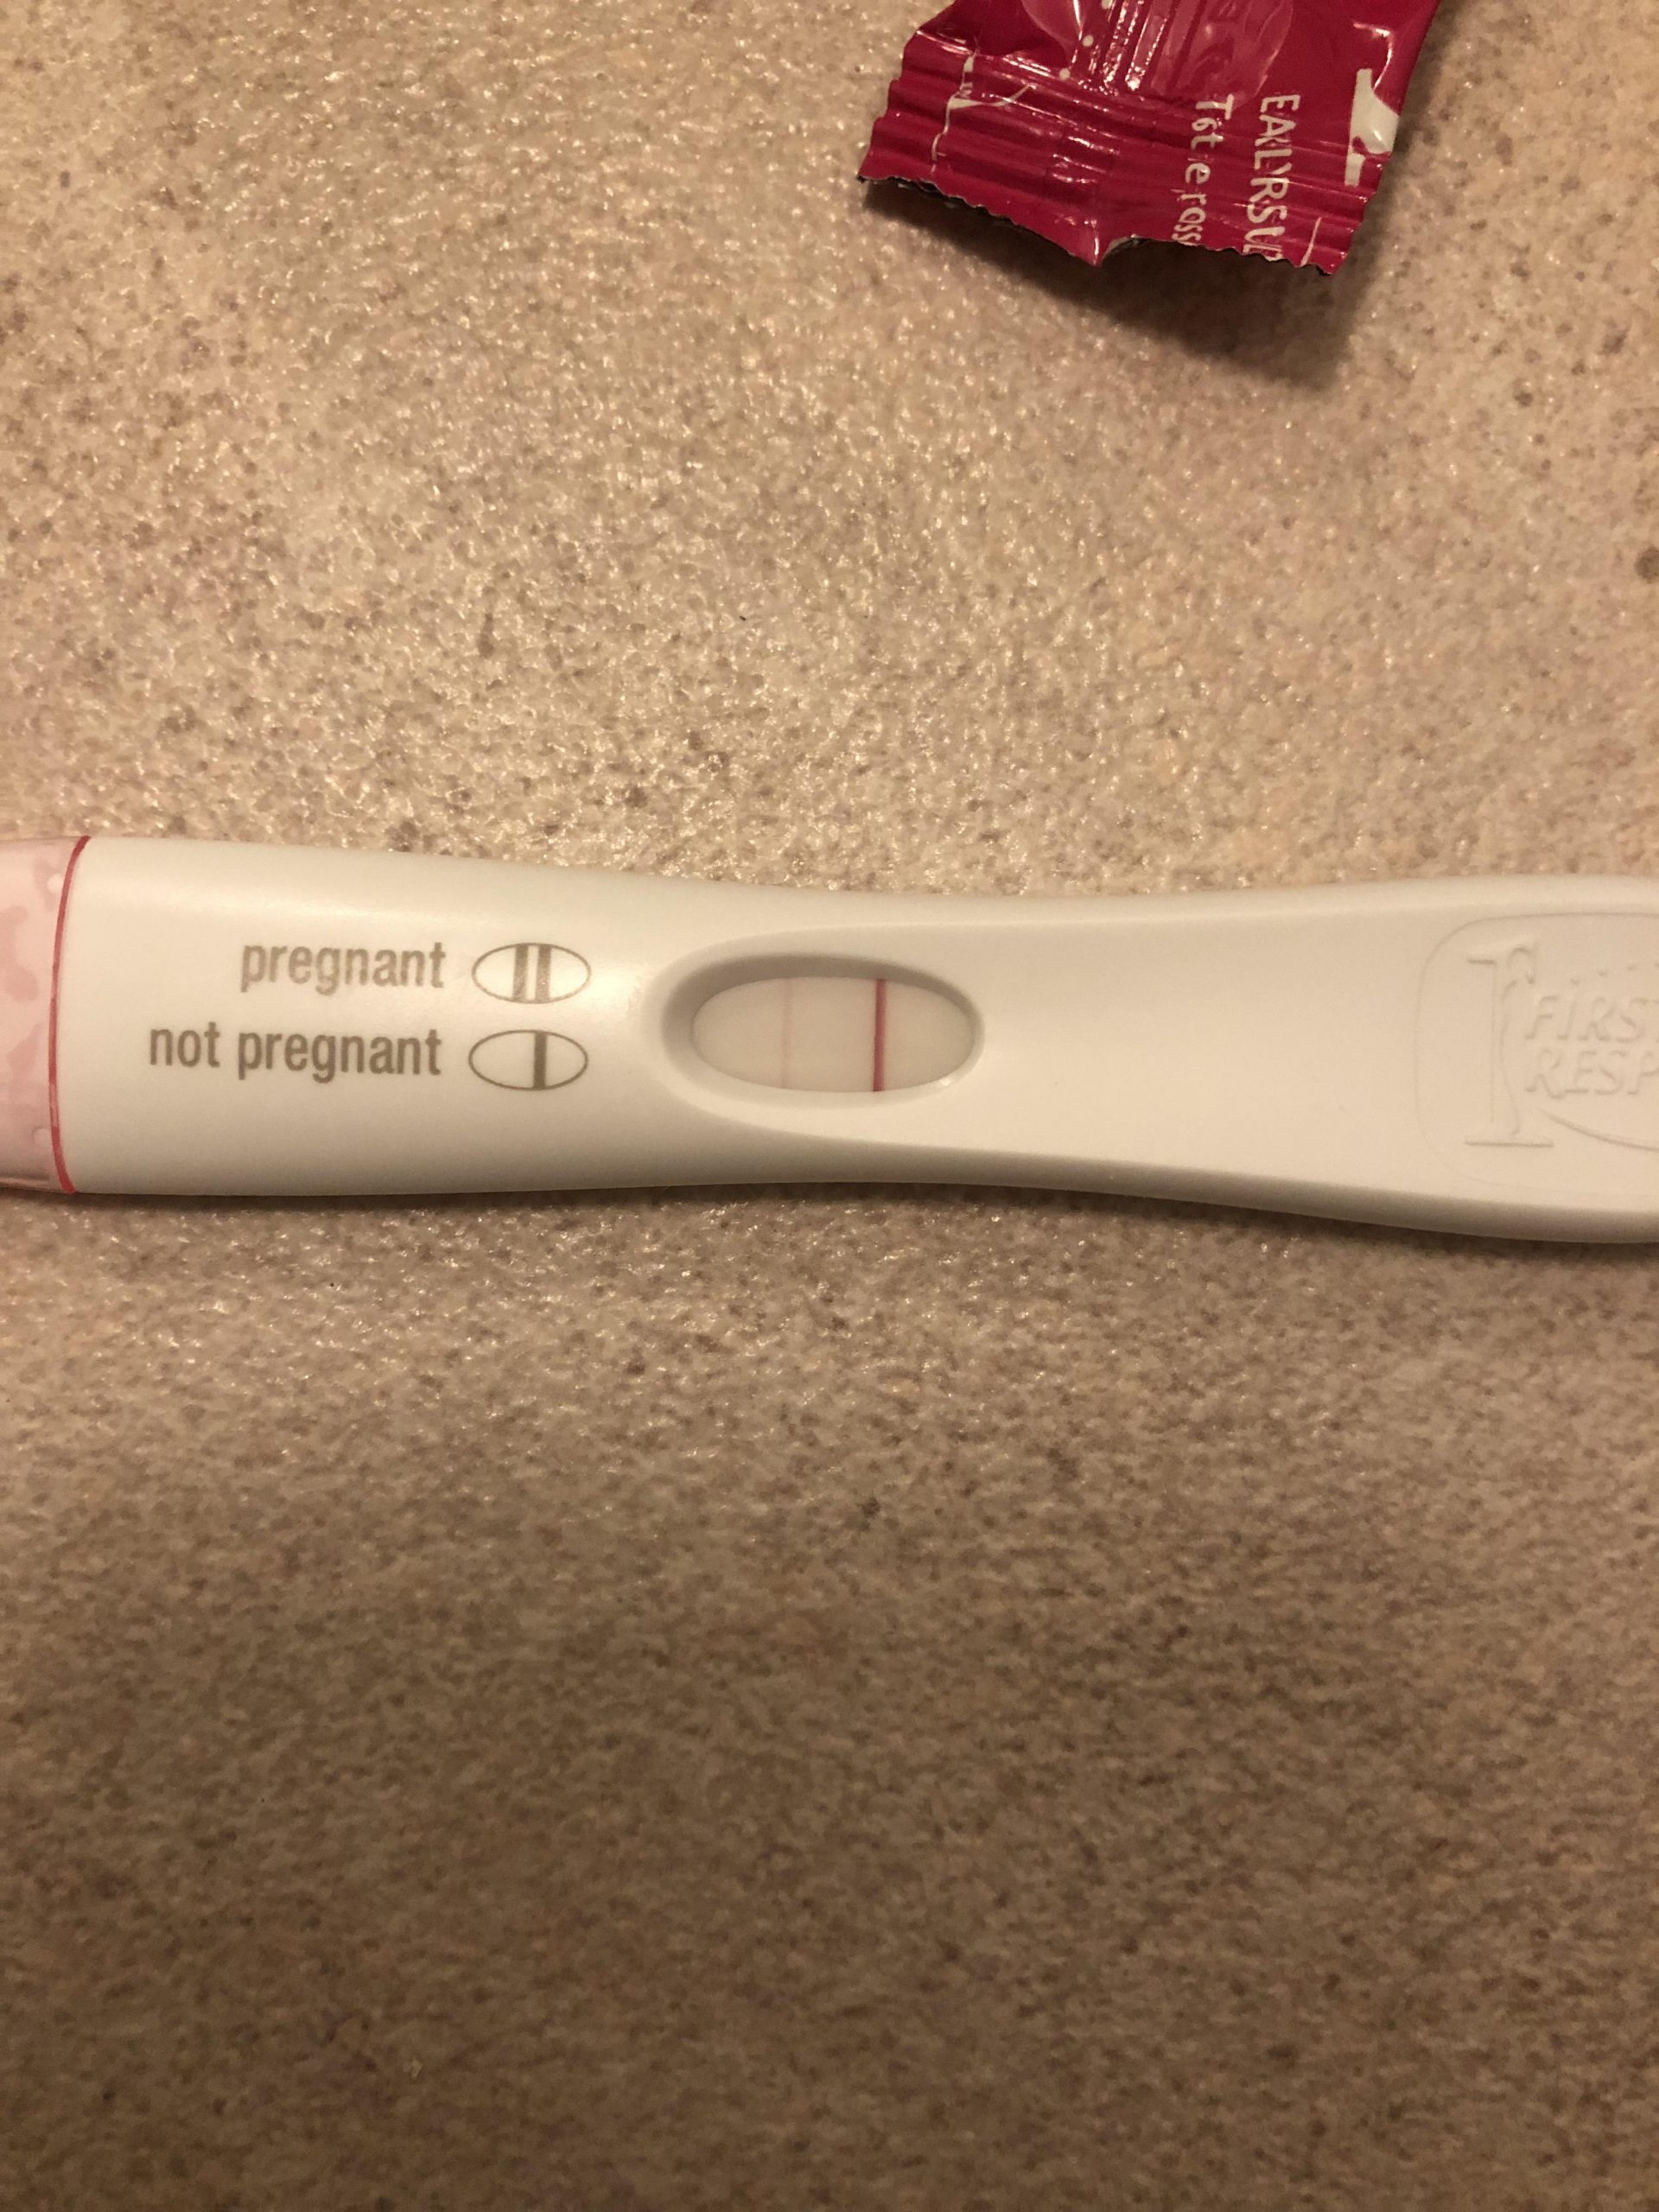 Can A Uti Cause A Positive Pregnancy Test